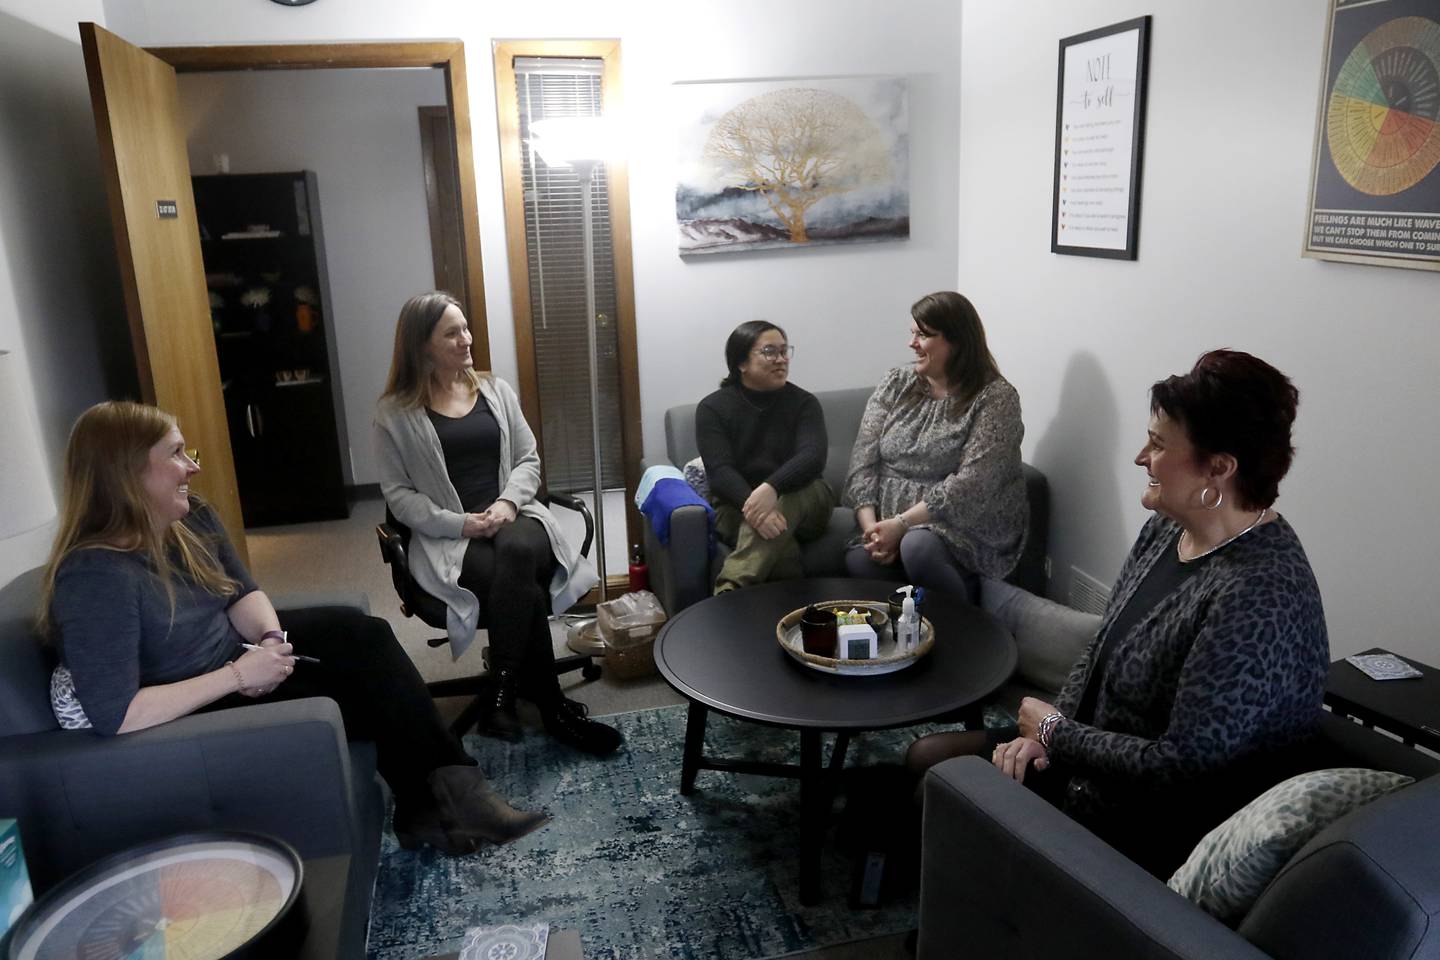 Rebecca Plascencia, second from right, the deputy director of Northwest Center Against Sexual Assault, talks with her co-workers Development Manager Kristen Barry, Executive Director Carrie Estrada, and advocates Jennifer Menchavez, and Pat Bogard at the center’s offices in Arlington Heights on Thursday, March 9, 2023.